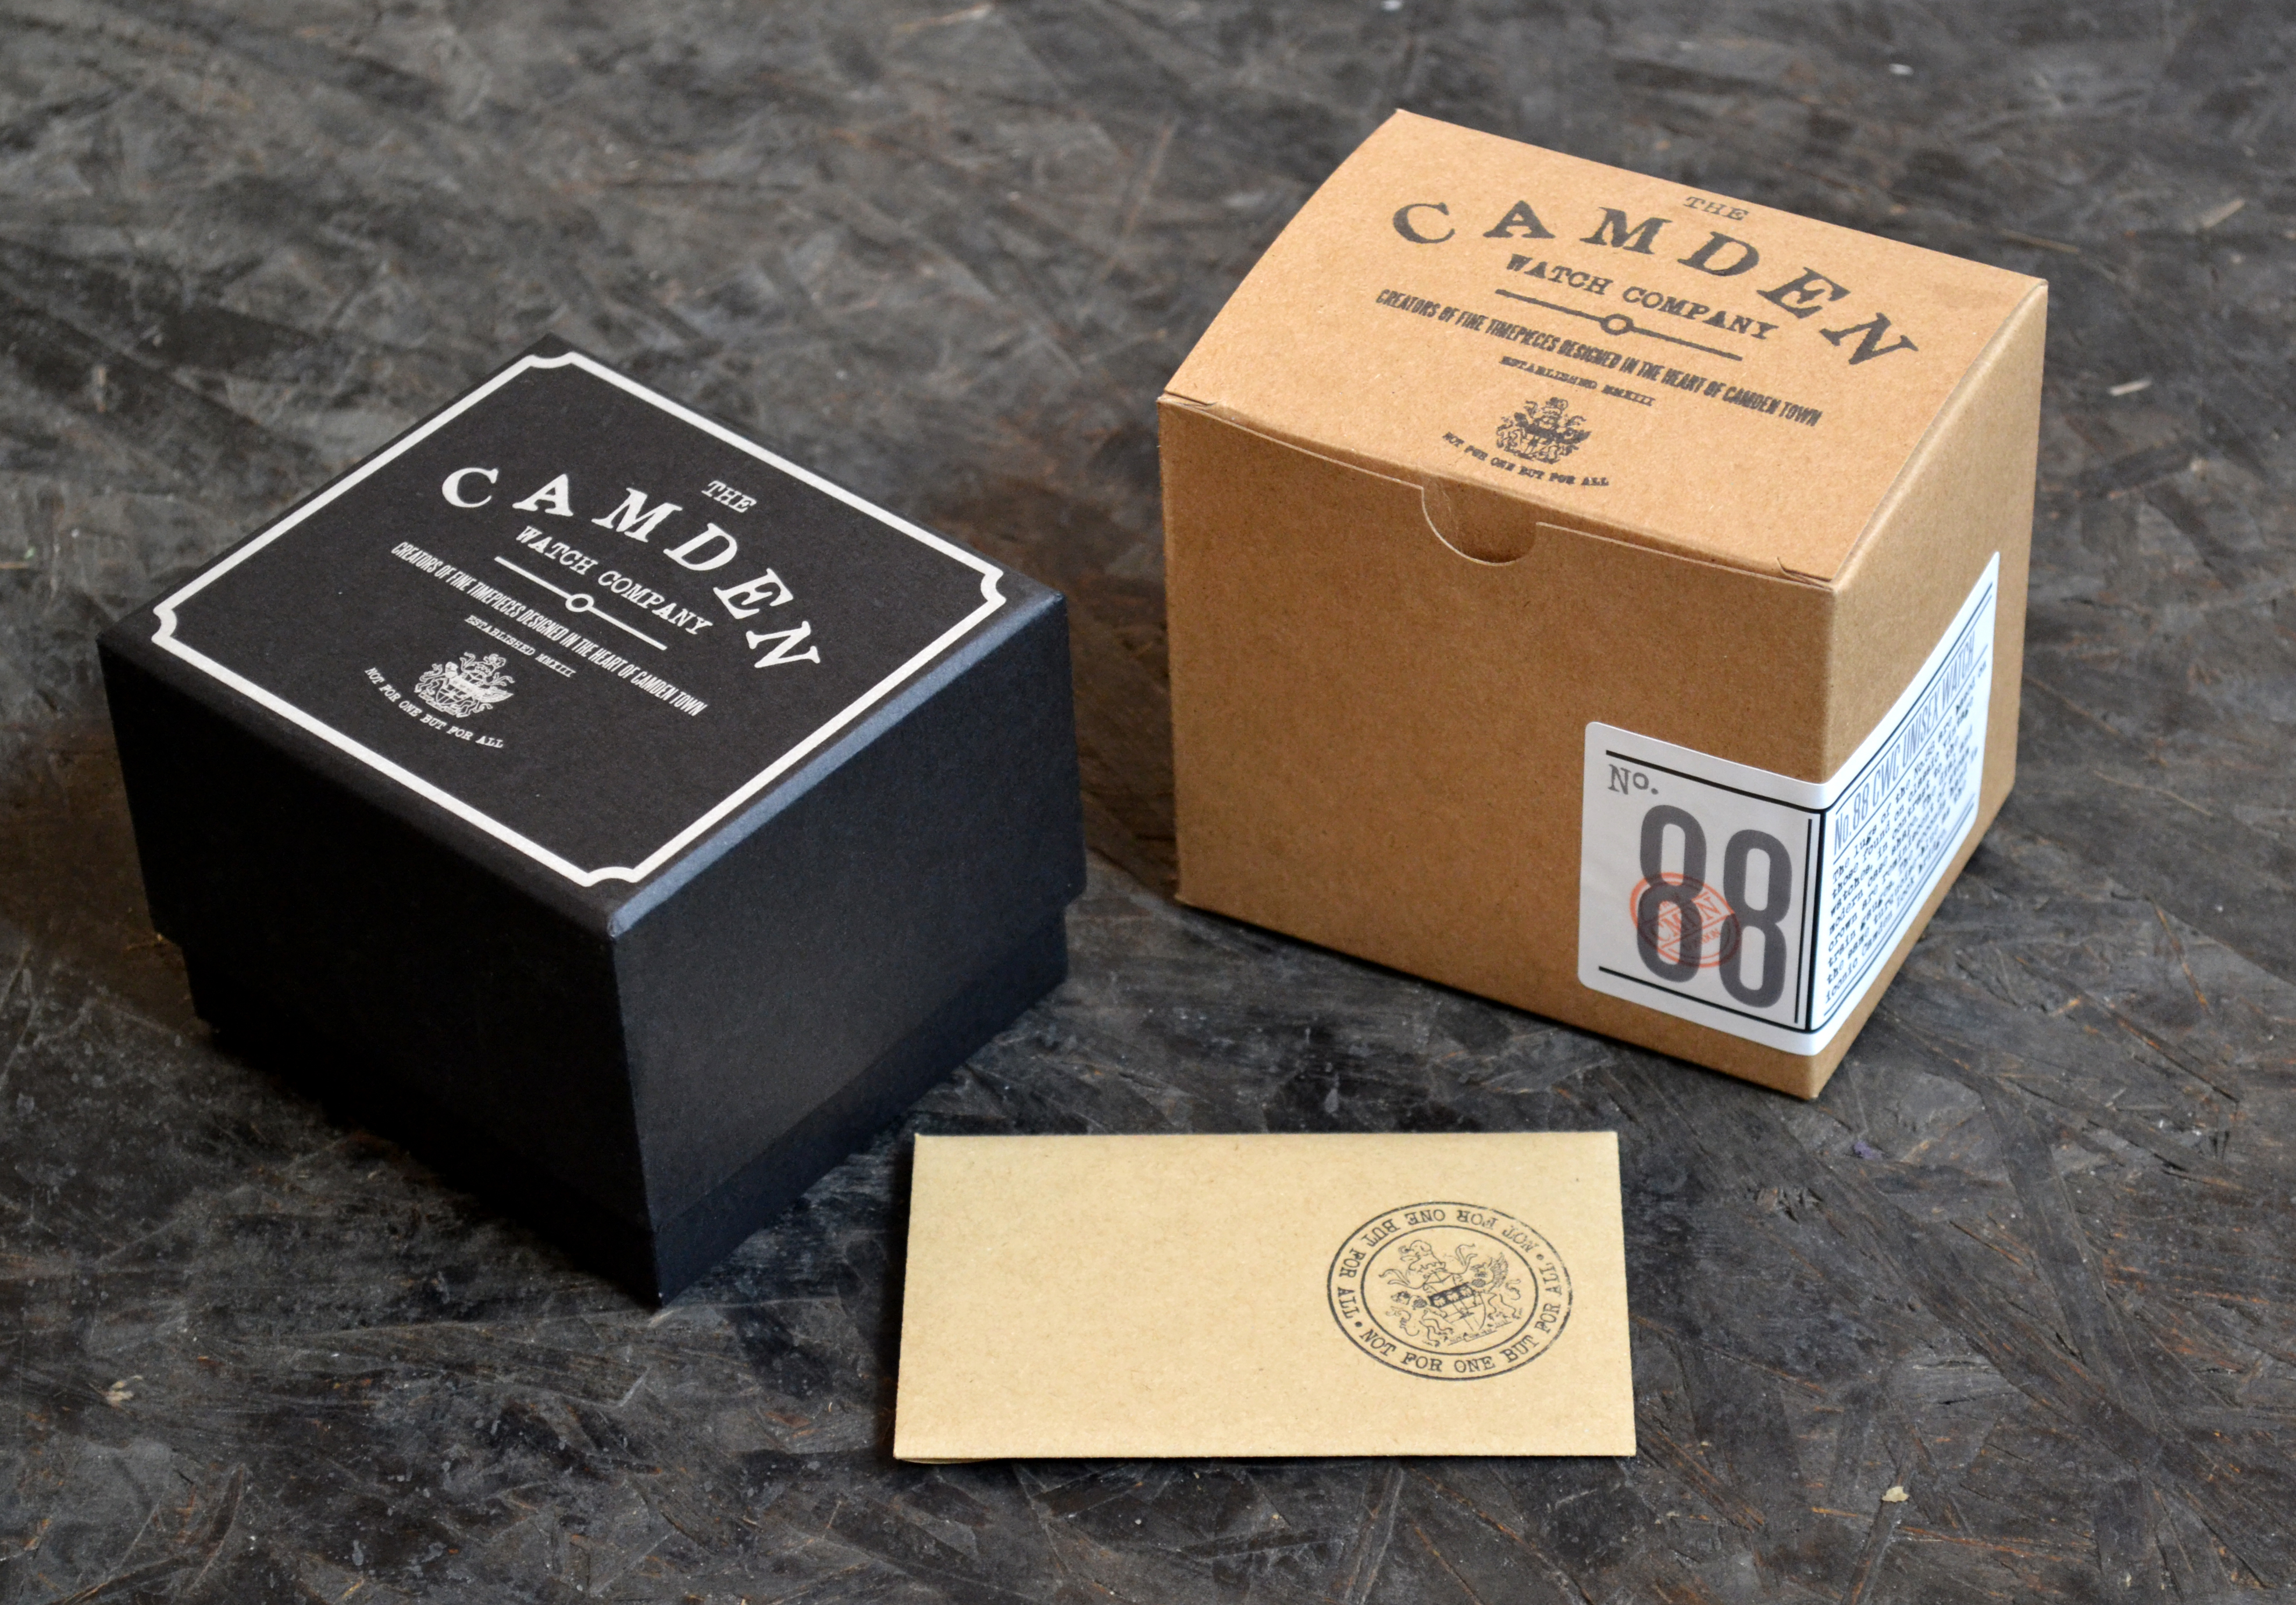 The Camden Watch Company Packaging